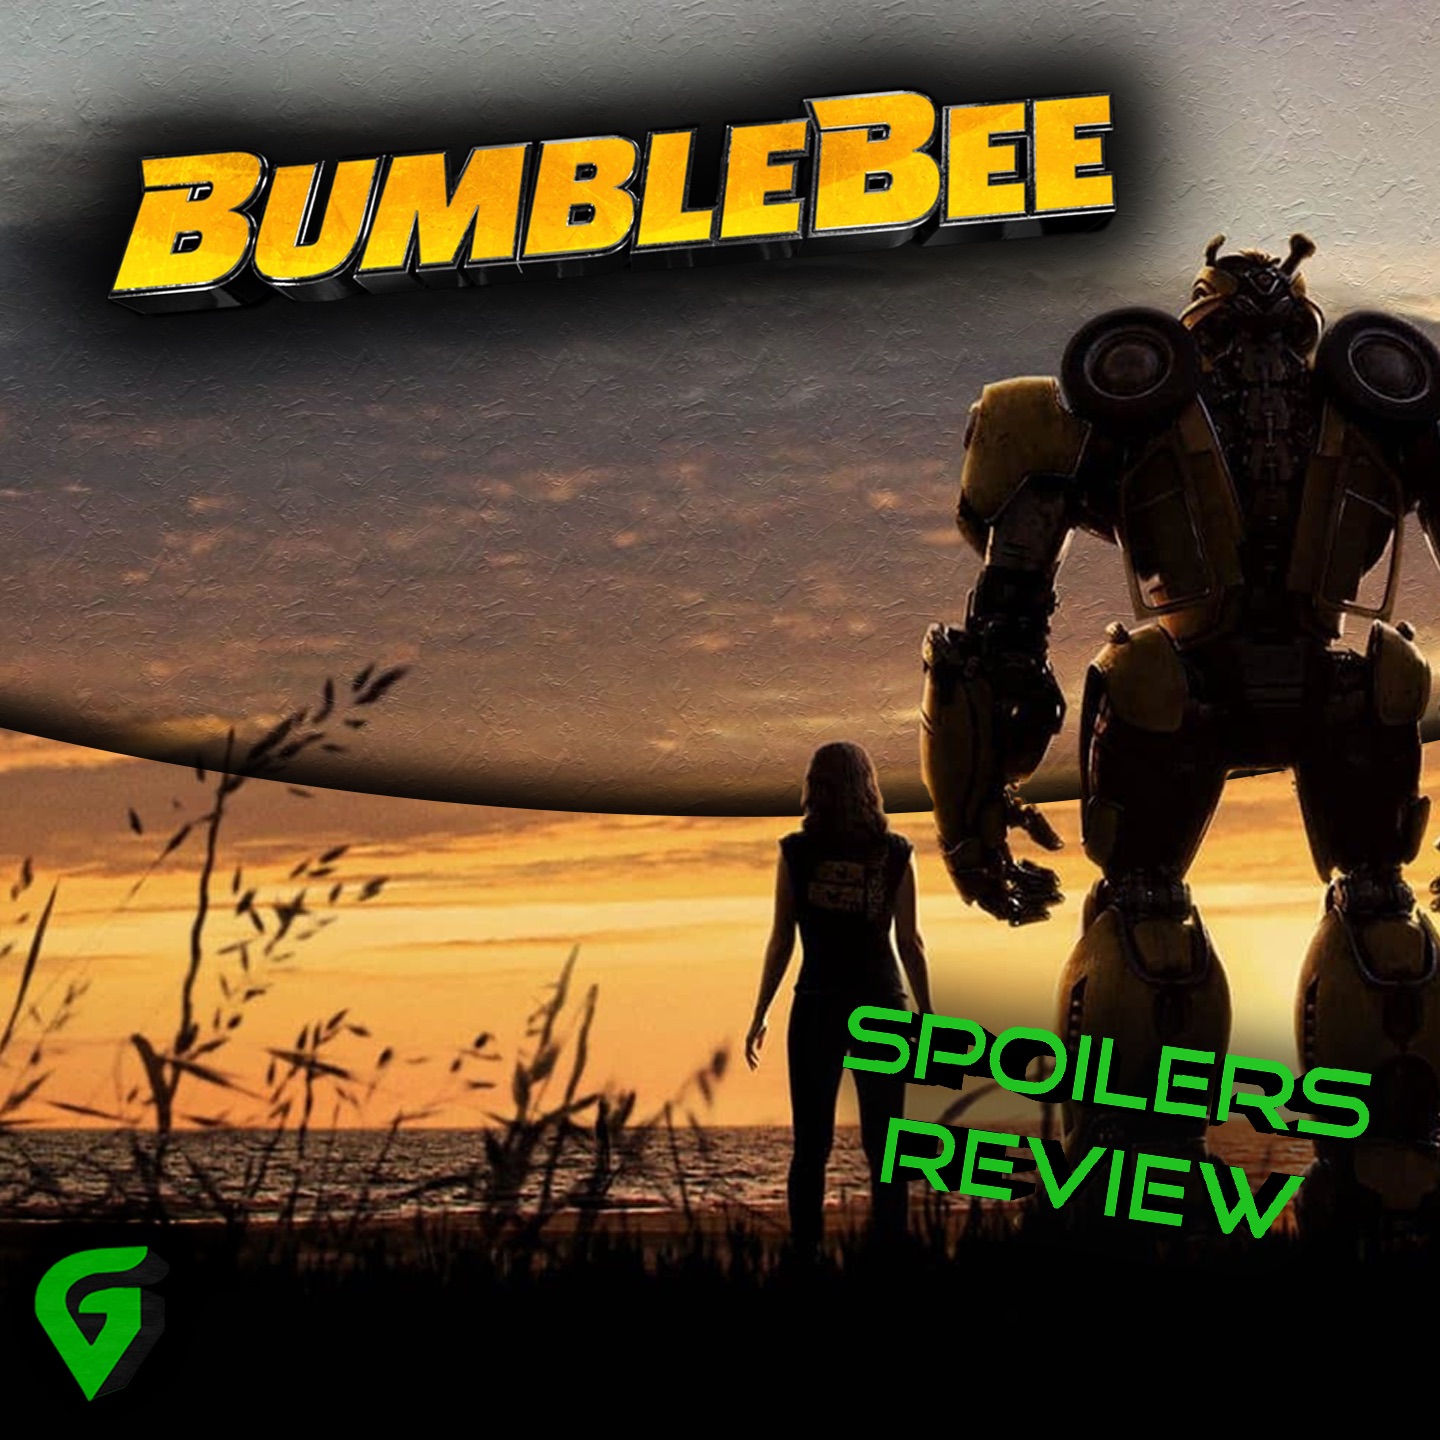 Bumblebee Review/Spoilers Discussion : GeekVerse Podcast